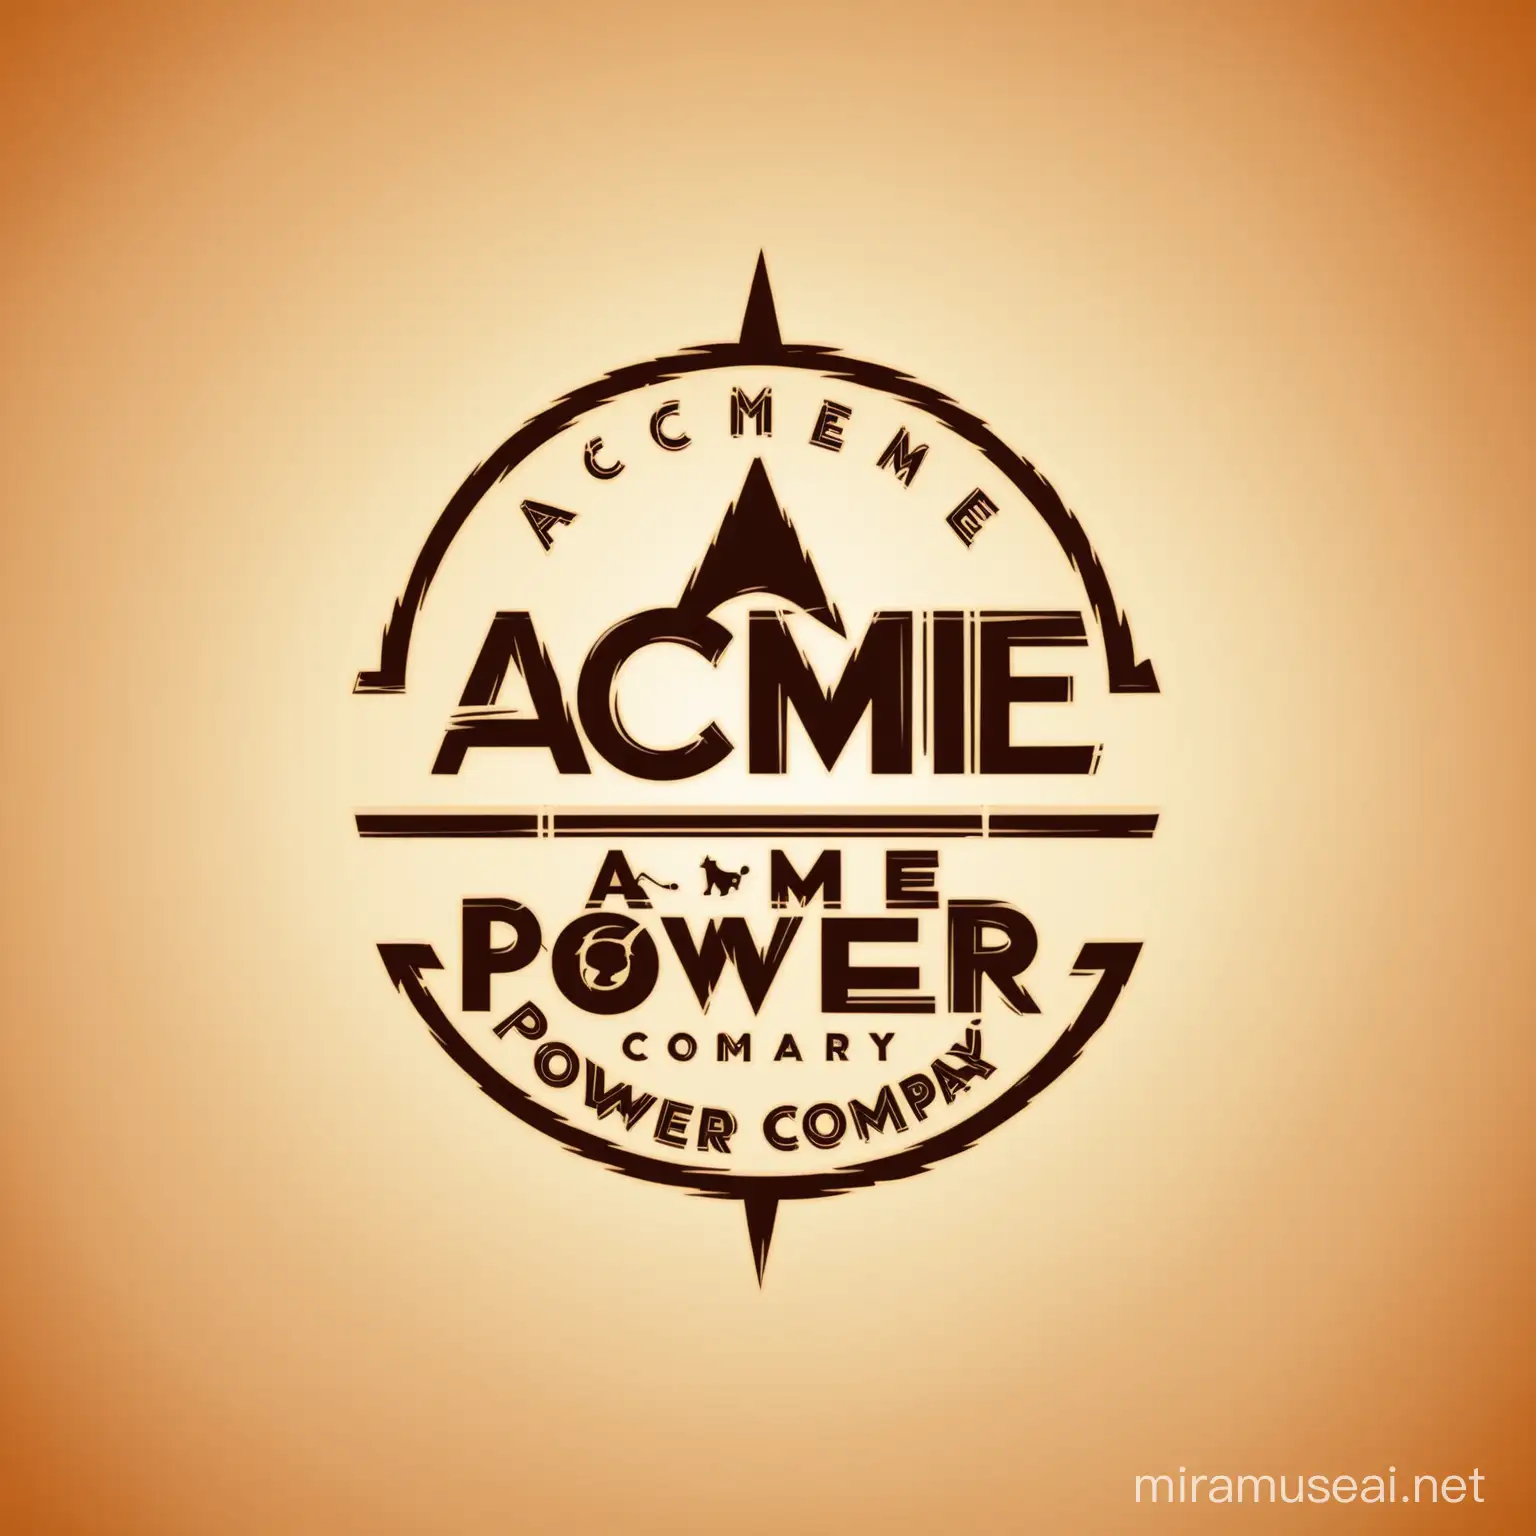 Create a logo for the acme power company. image should have some electrical elements
